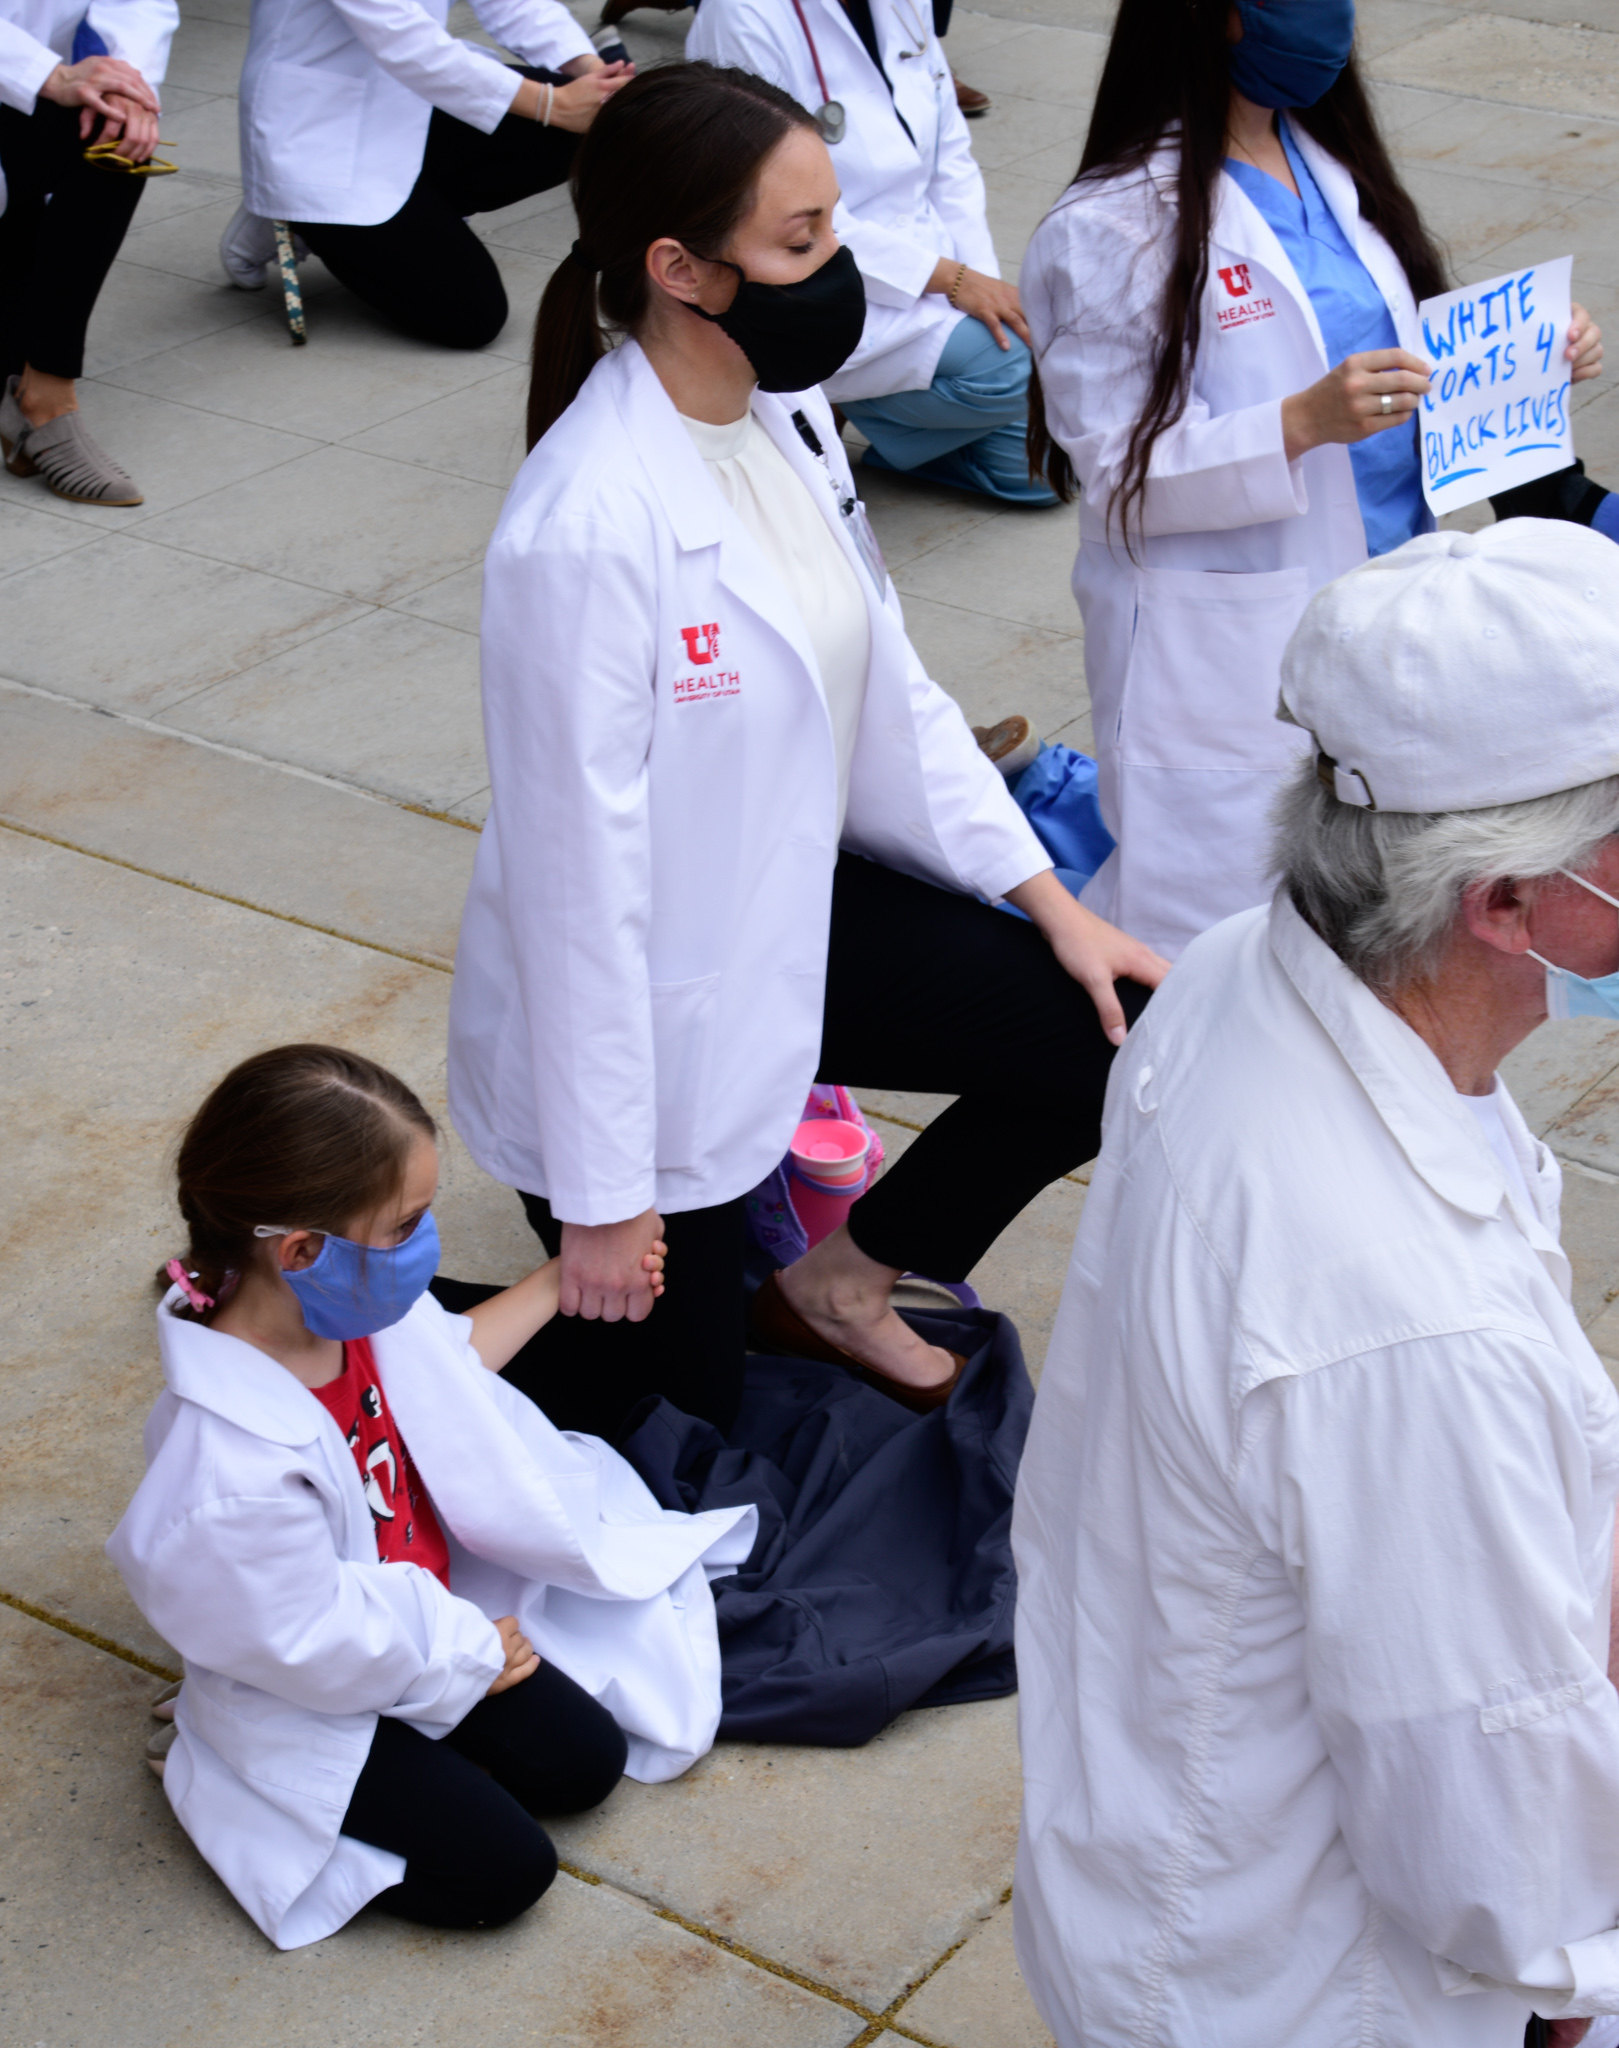 White Coats for Black Lives 3 Woman kneeling with child